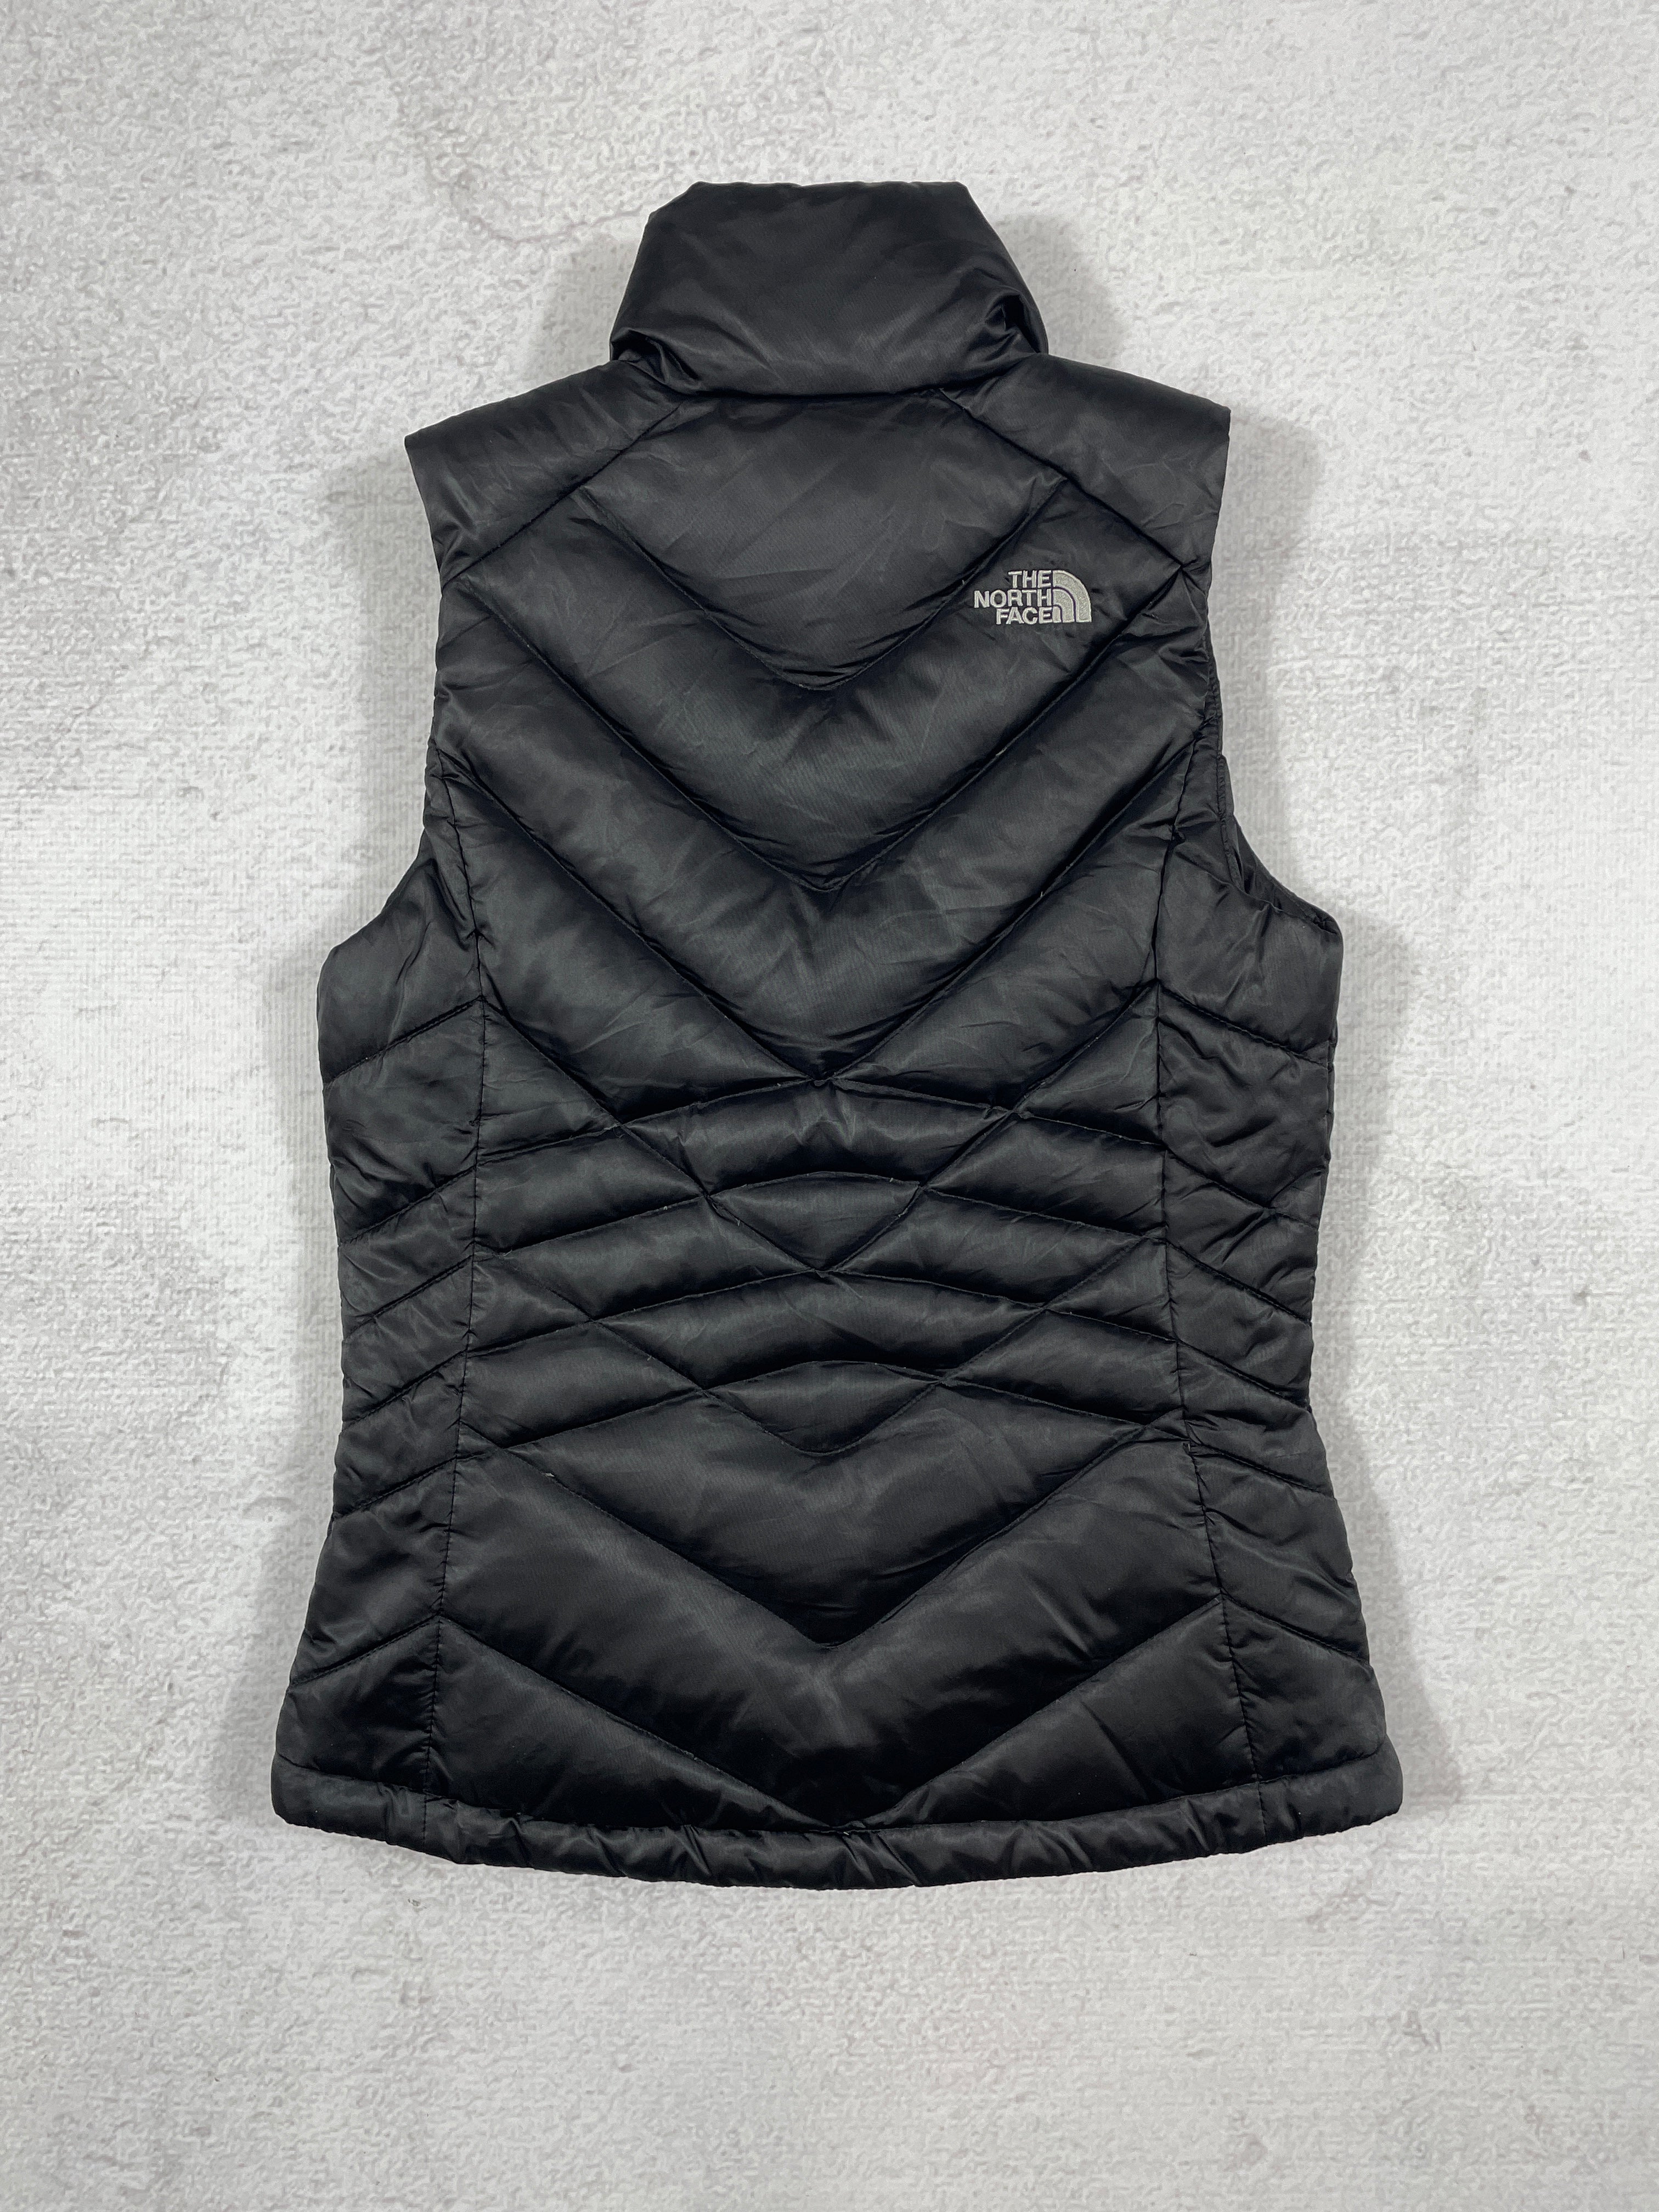 Vintage The North Face 550 Series Puffer Vest - Women's XS